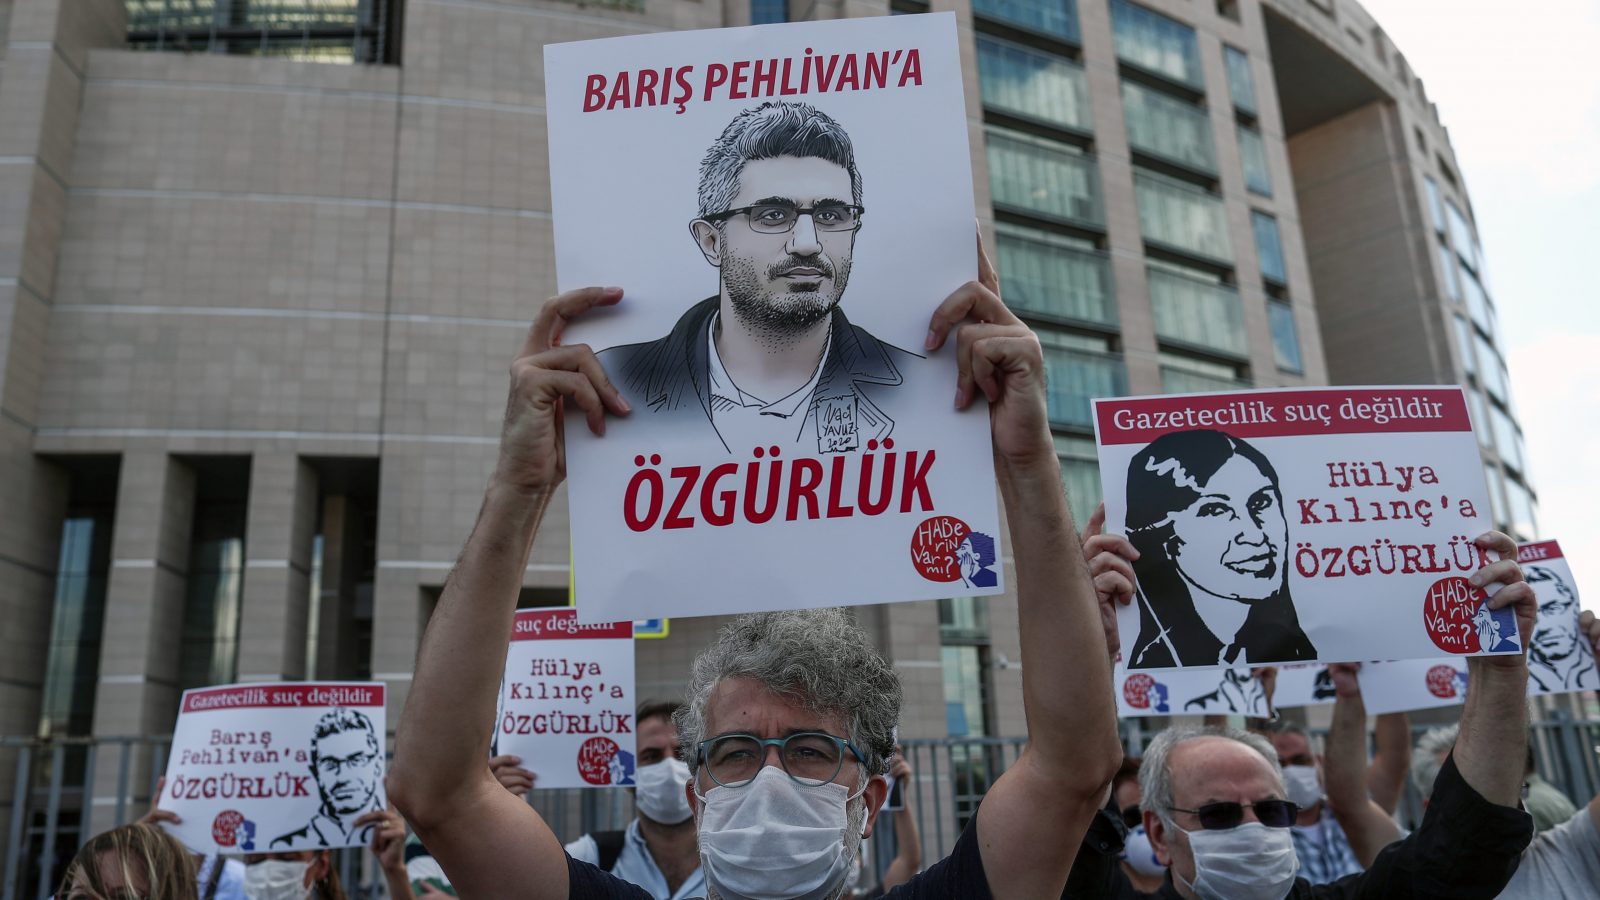 Turkey’s Repeated Jailing of Journalist Condemned as ‘Judicial Harassment’